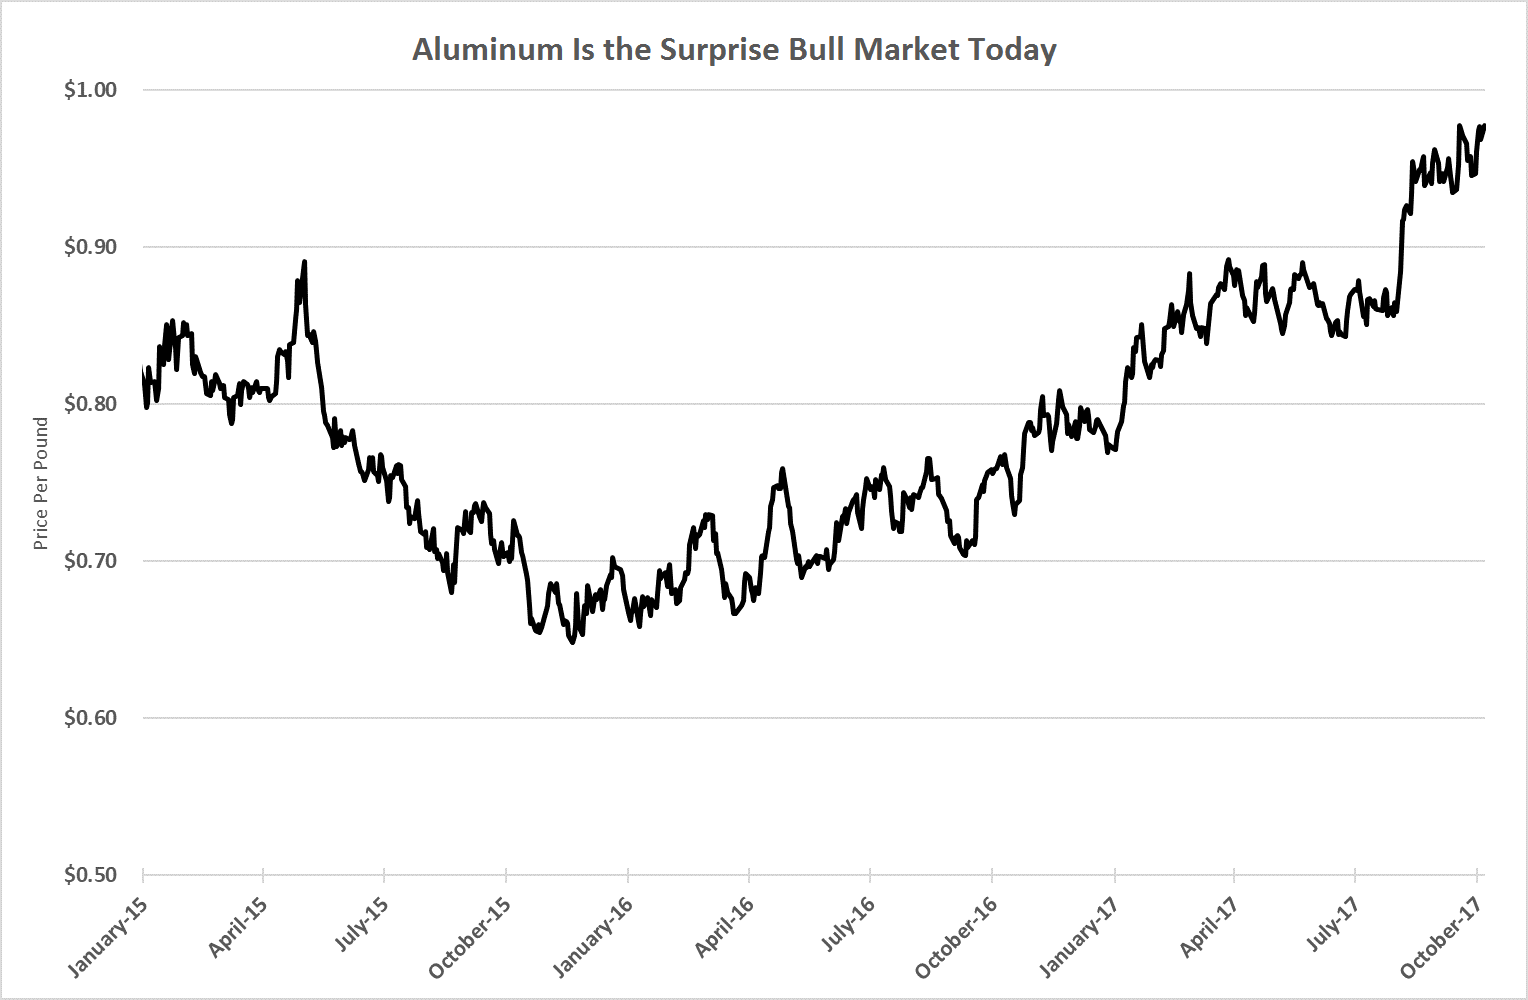 Aluminum hit a record low in November 2015. It was the cheapest it's been since the bottom of the last bear market. And now the price is soaring.